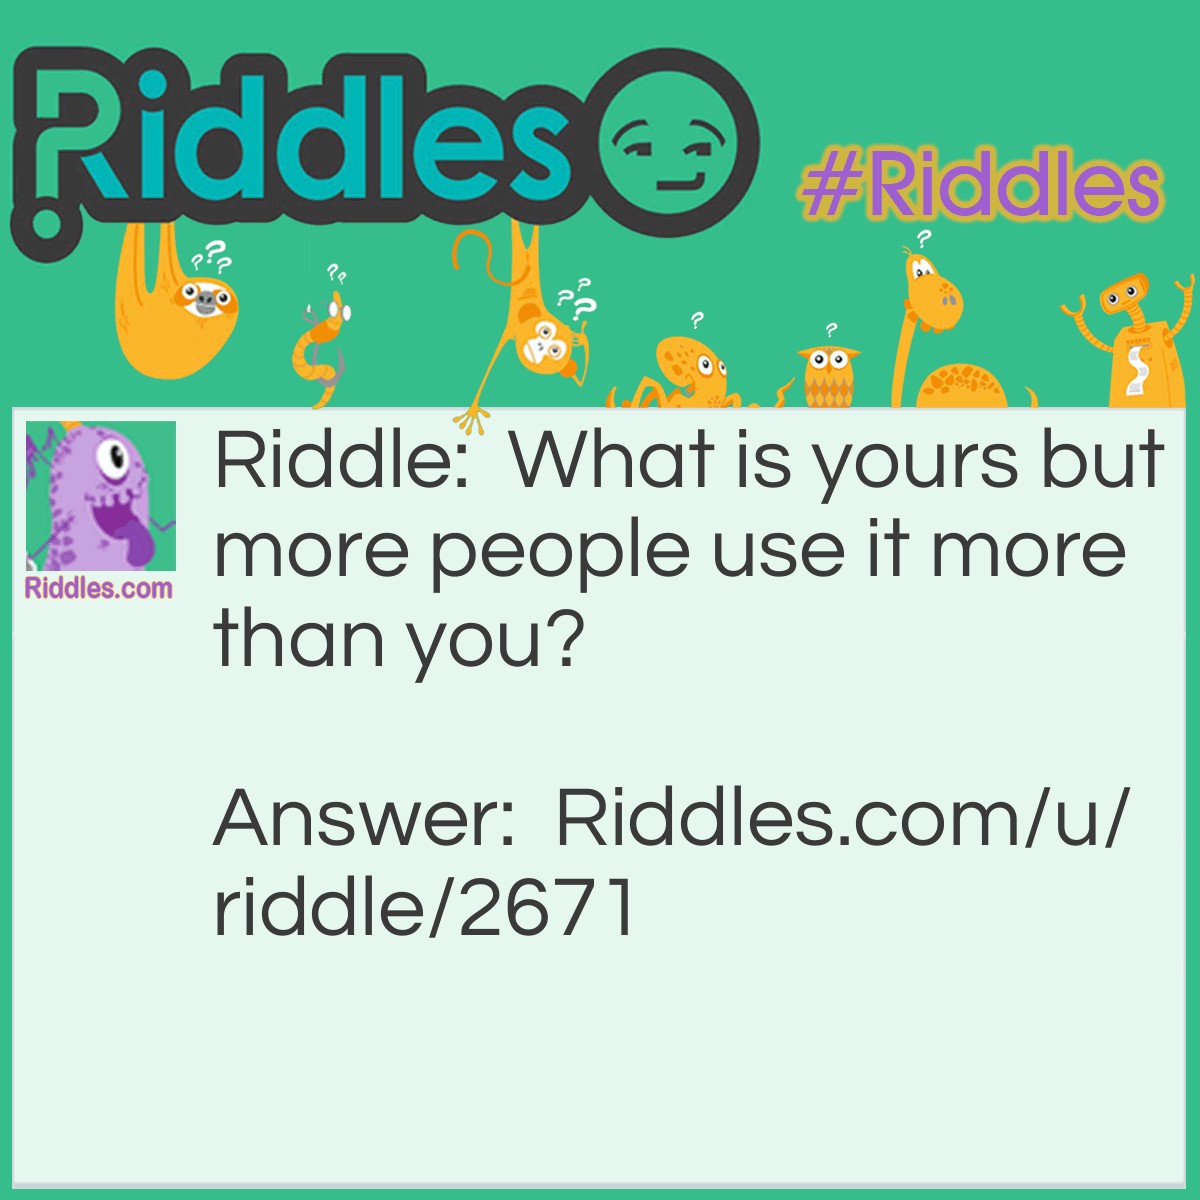 Riddle: What is yours but more people use it more than you? Answer: Your name